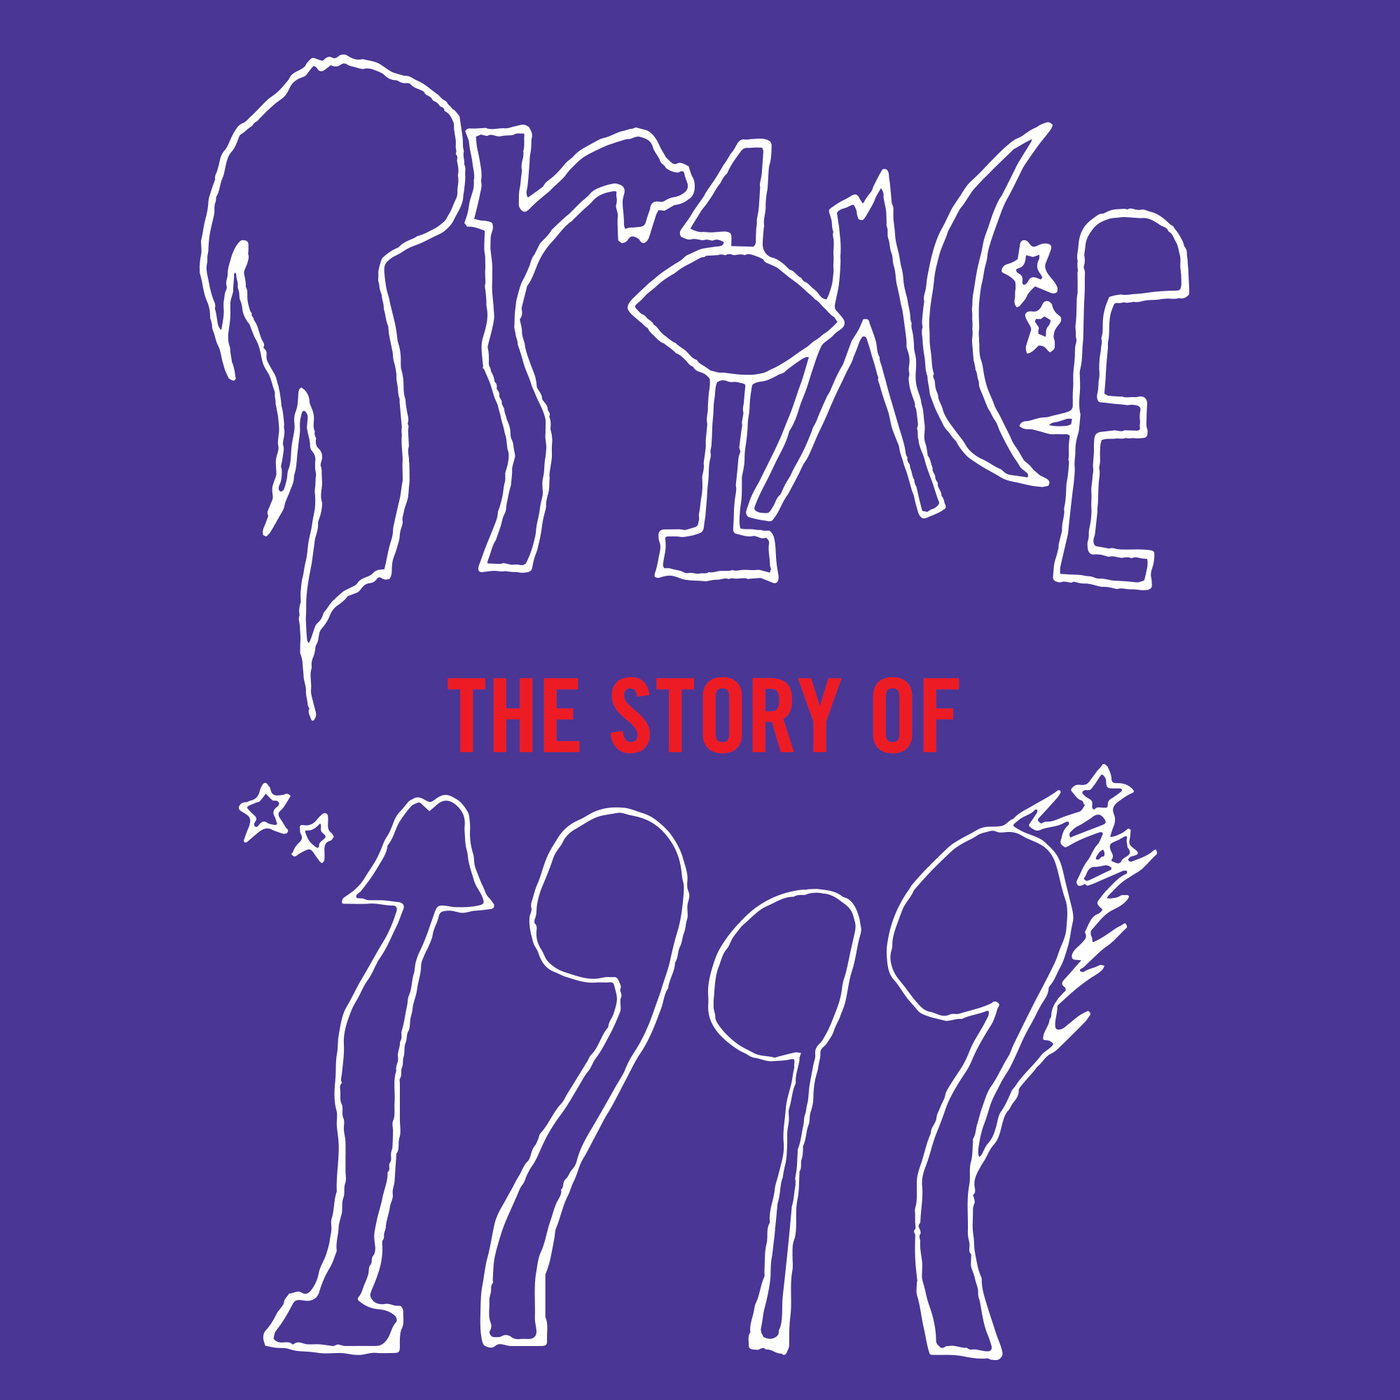 Prince: The Story of 1999, Episode 3: The Idolmaker